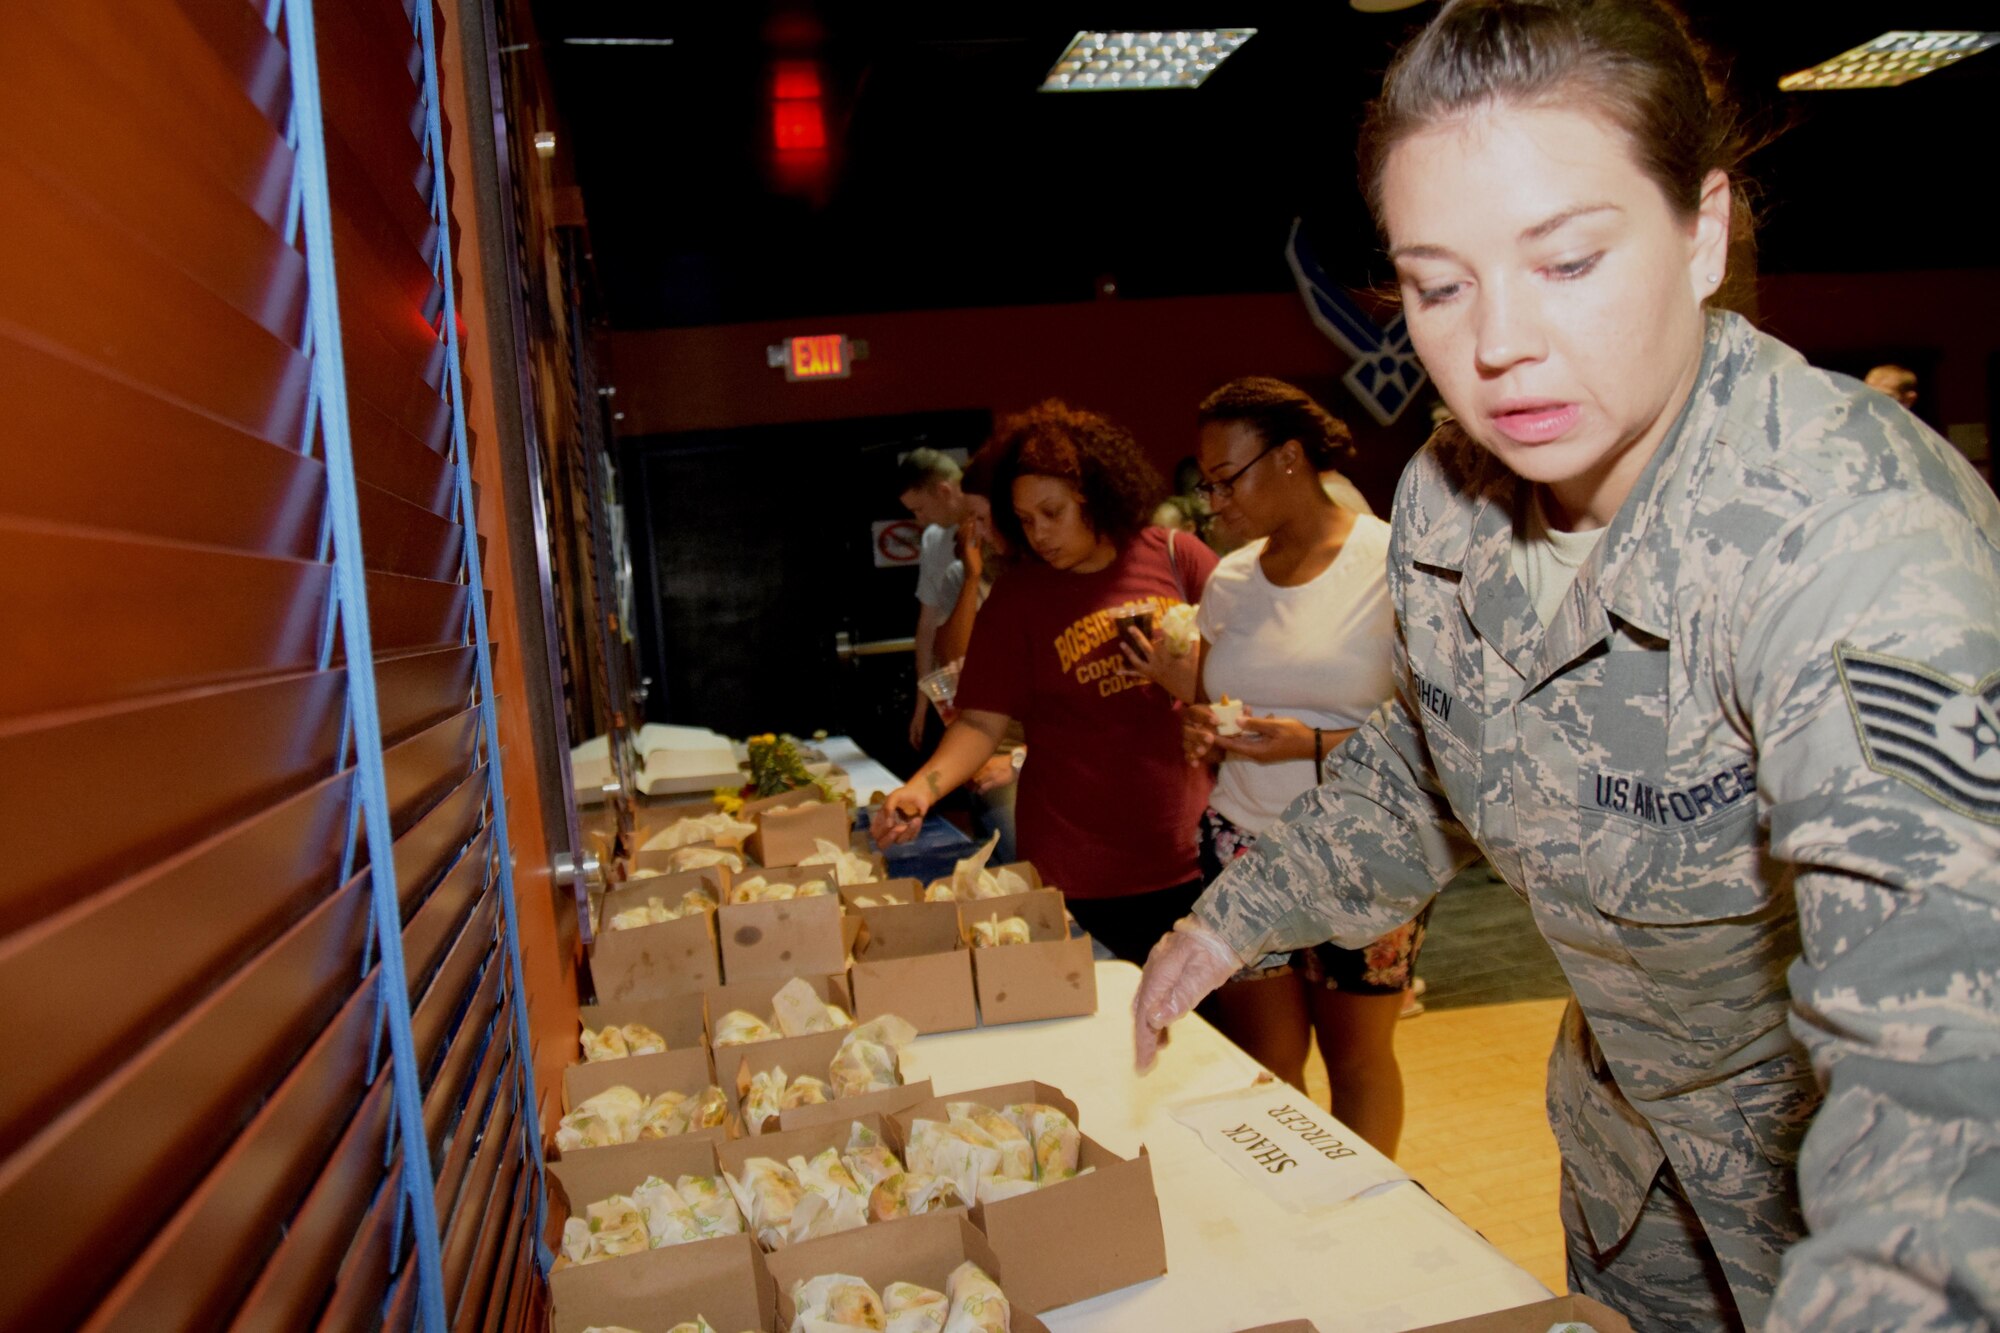 Tech. Sgt. Kirsten Cohen, 379th Expeditionary Force Support Squadron quality assurance technician, arranges sandwiches and desserts at a table inside the Fox Sports Lounge Sept. 23, 2016, at Al Udeid Air Base, Qatar. The free food was served at the Air Force Birthday Ball after-party. (U. S. Air Force photo/Tech. Sgt. Carlos J. Trevino/Released)